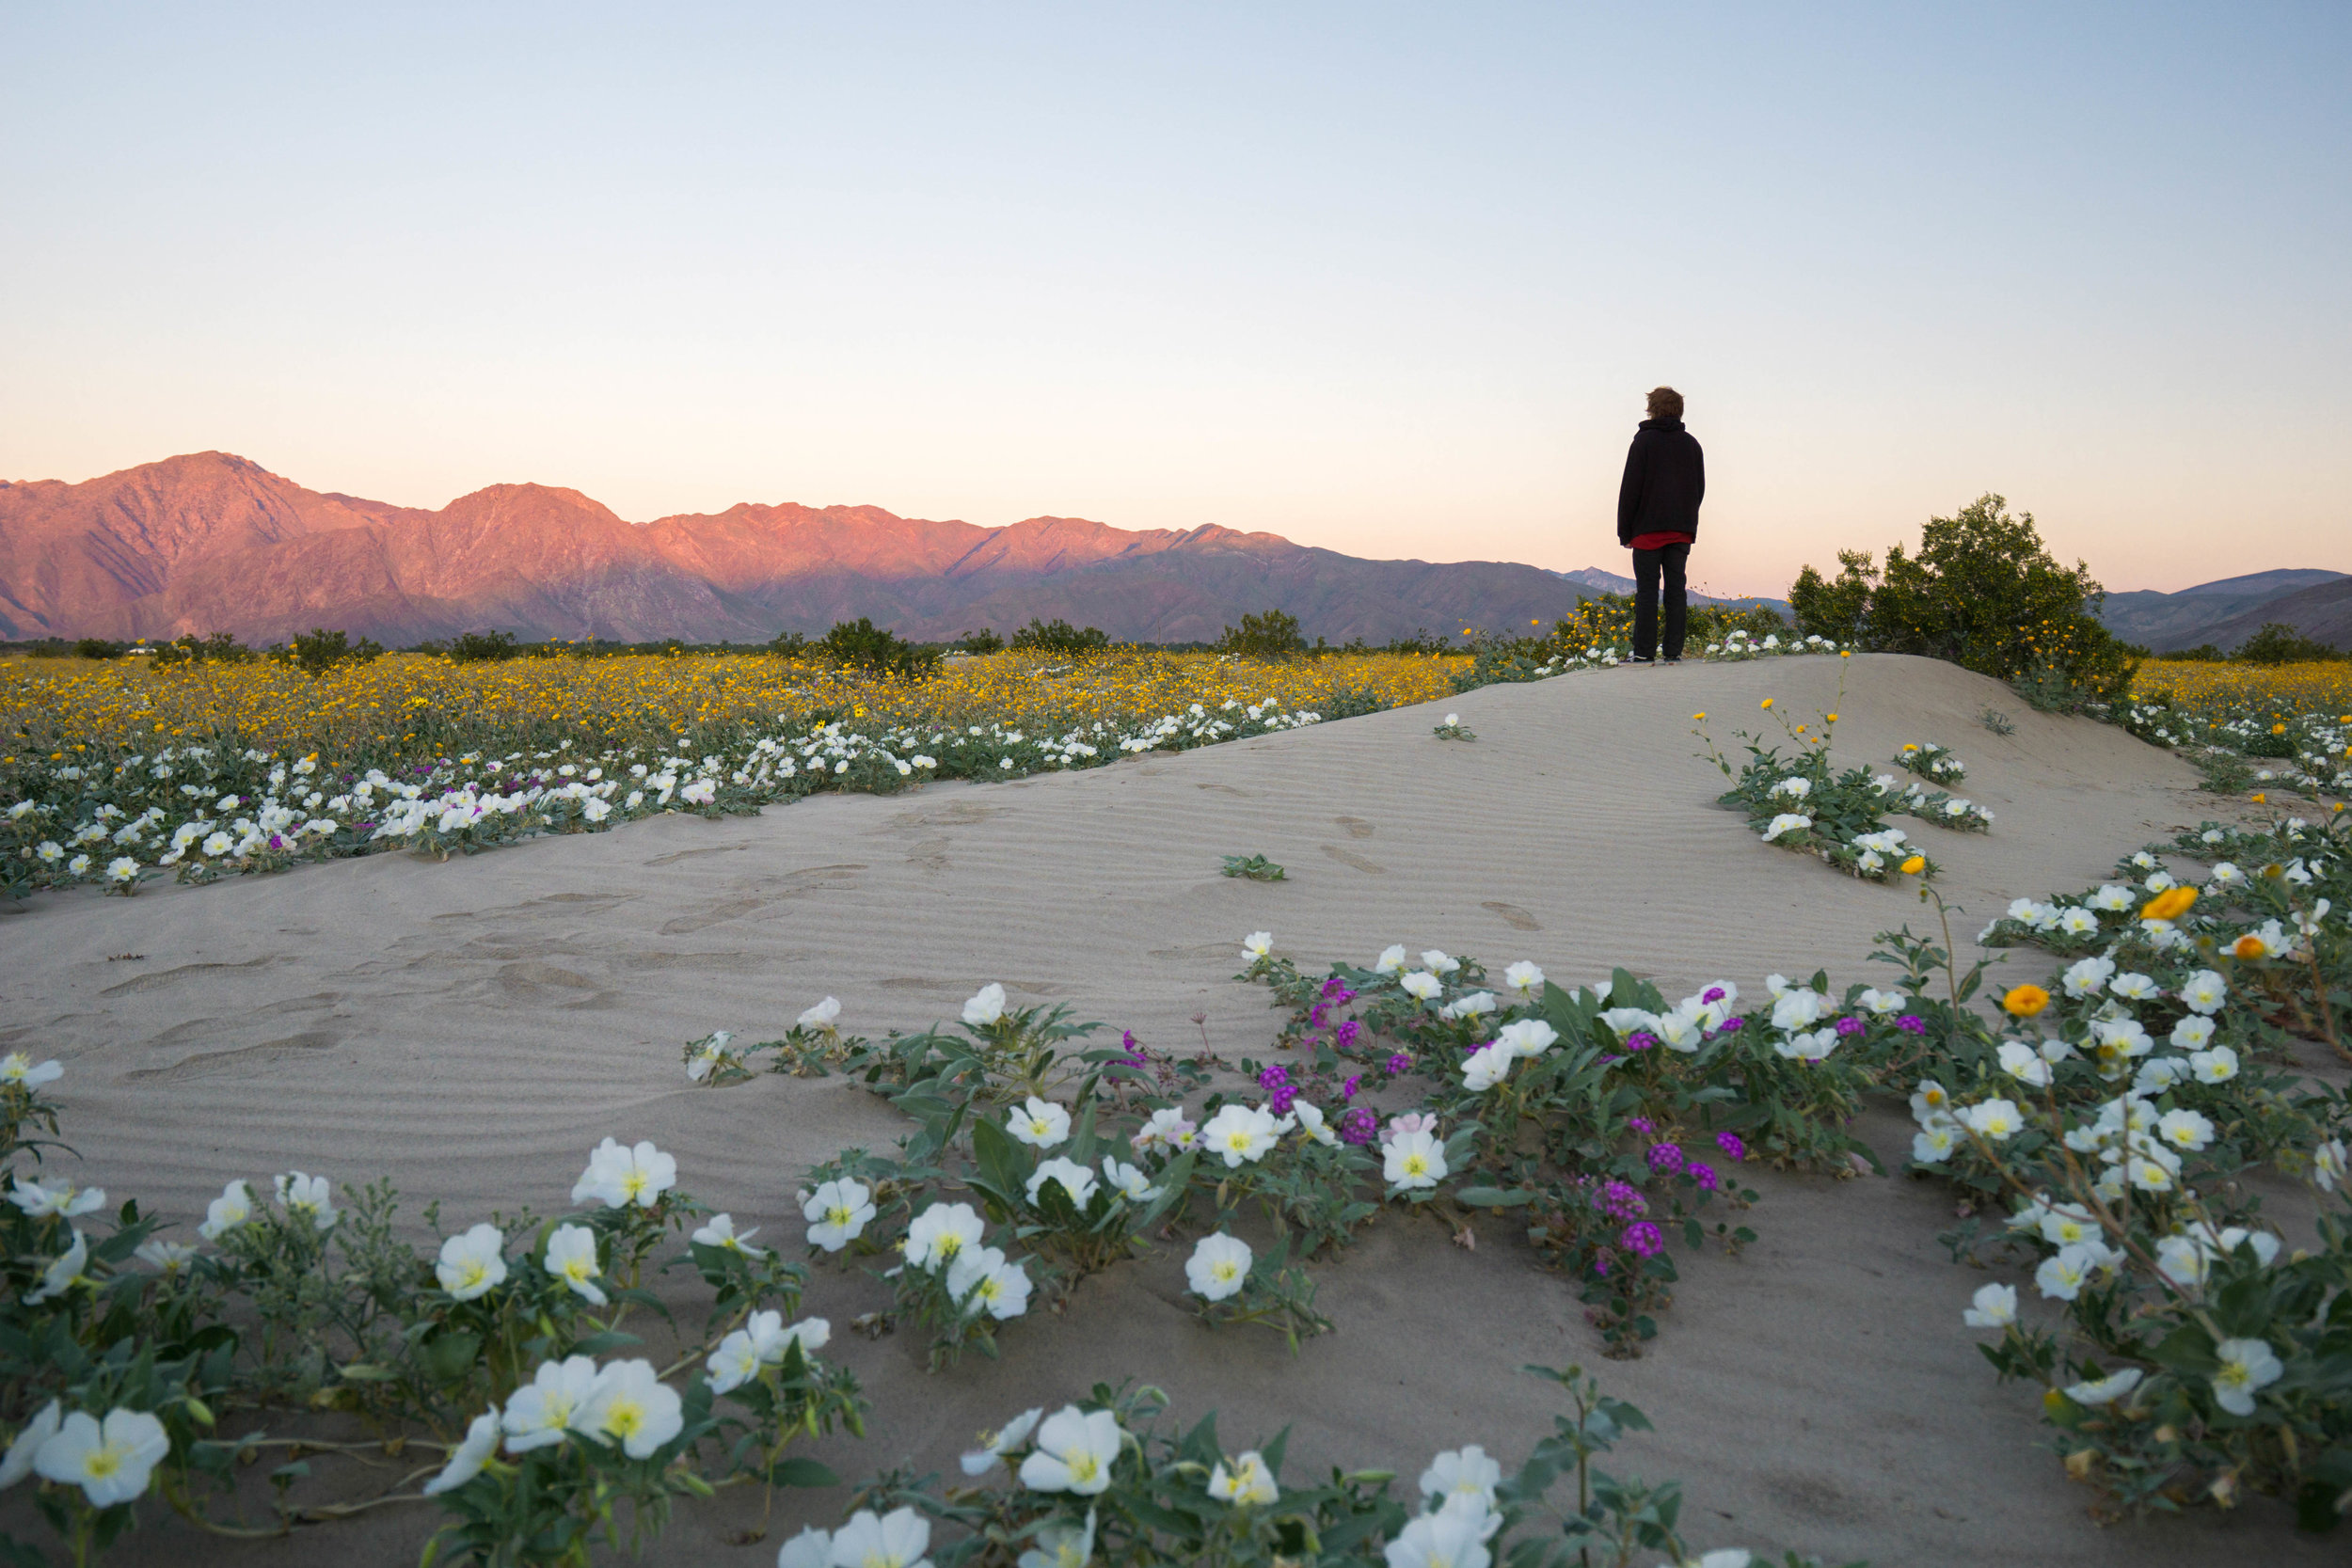 Drought combined with sudden rain activated dormant seeds littered across the desert years ago, producing the largest bloom in nearly 2 decades